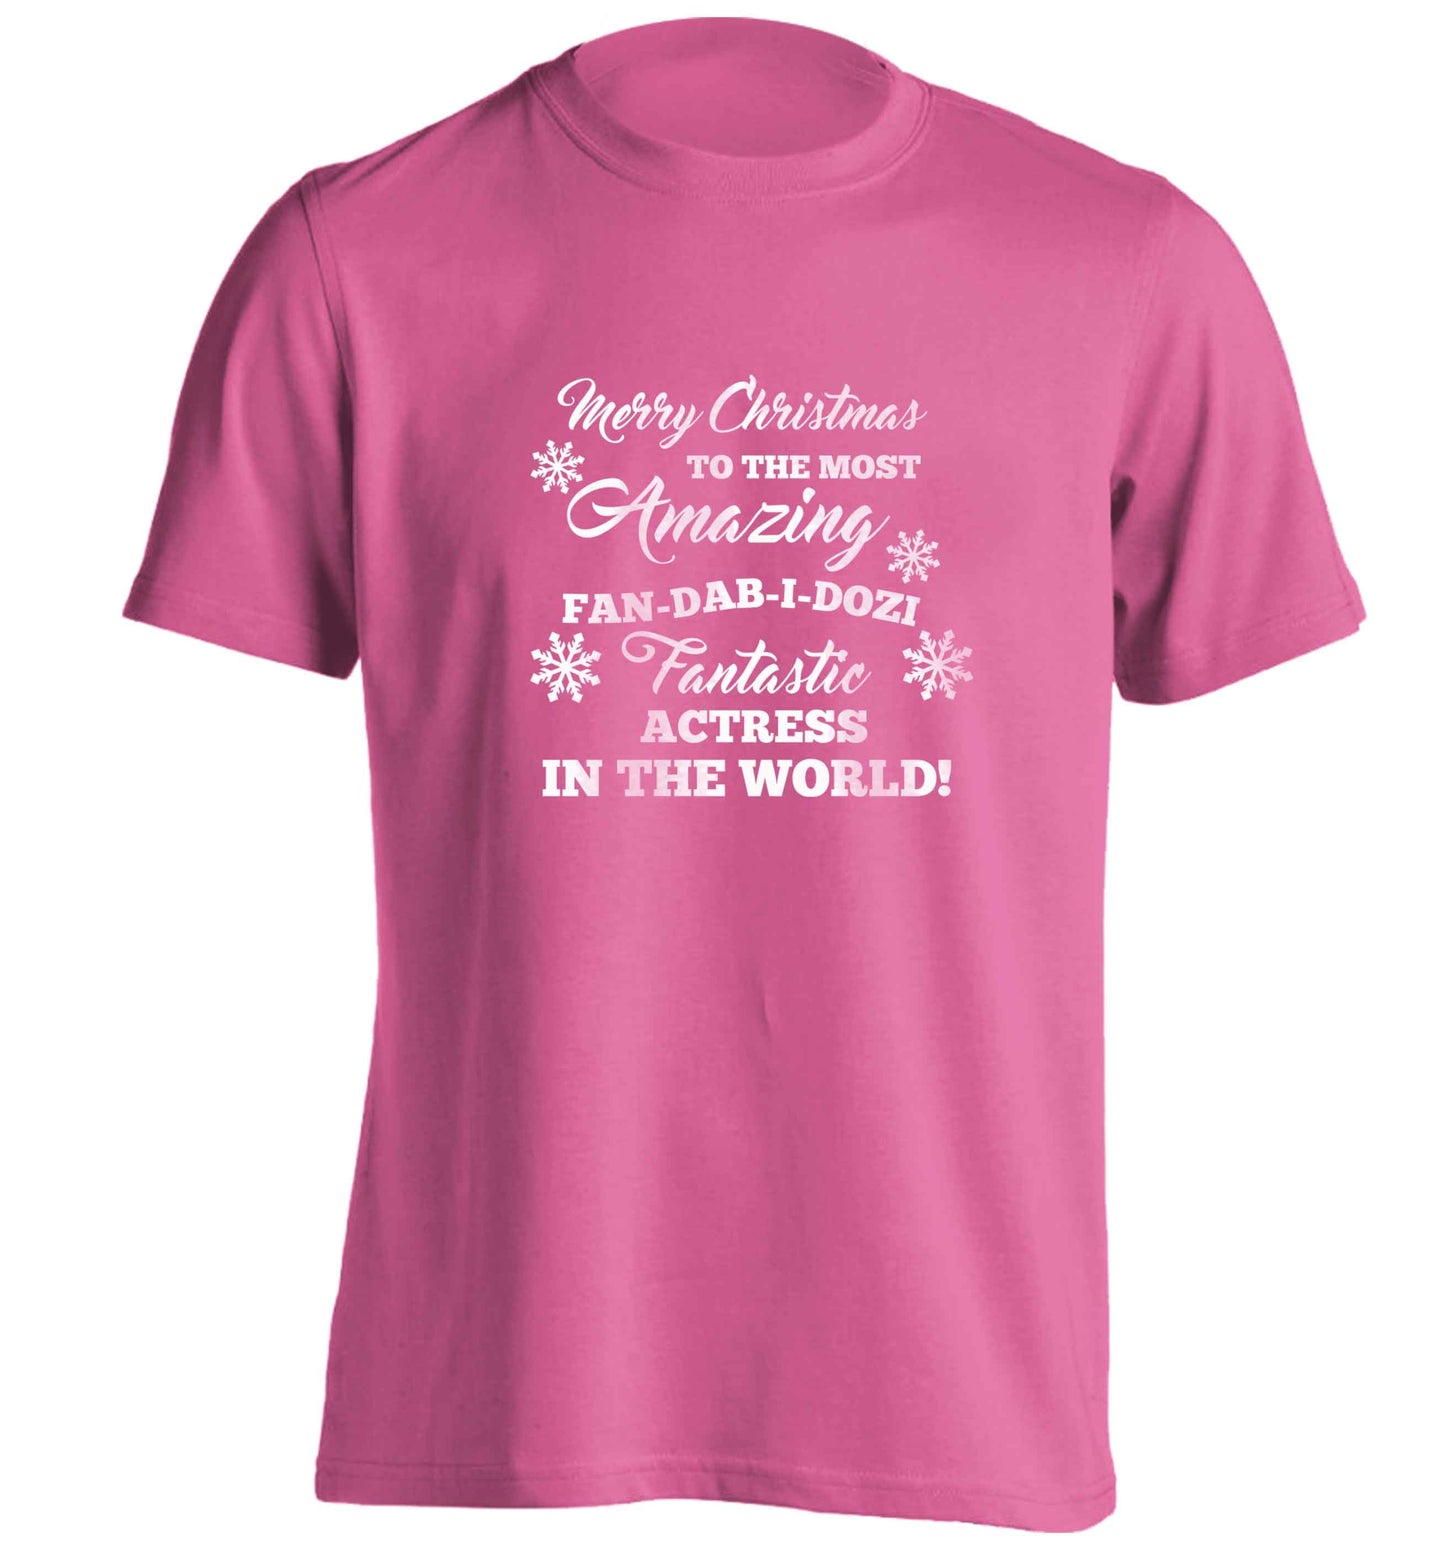 Merry Christmas to the most amazing actress in the world! adults unisex pink Tshirt 2XL